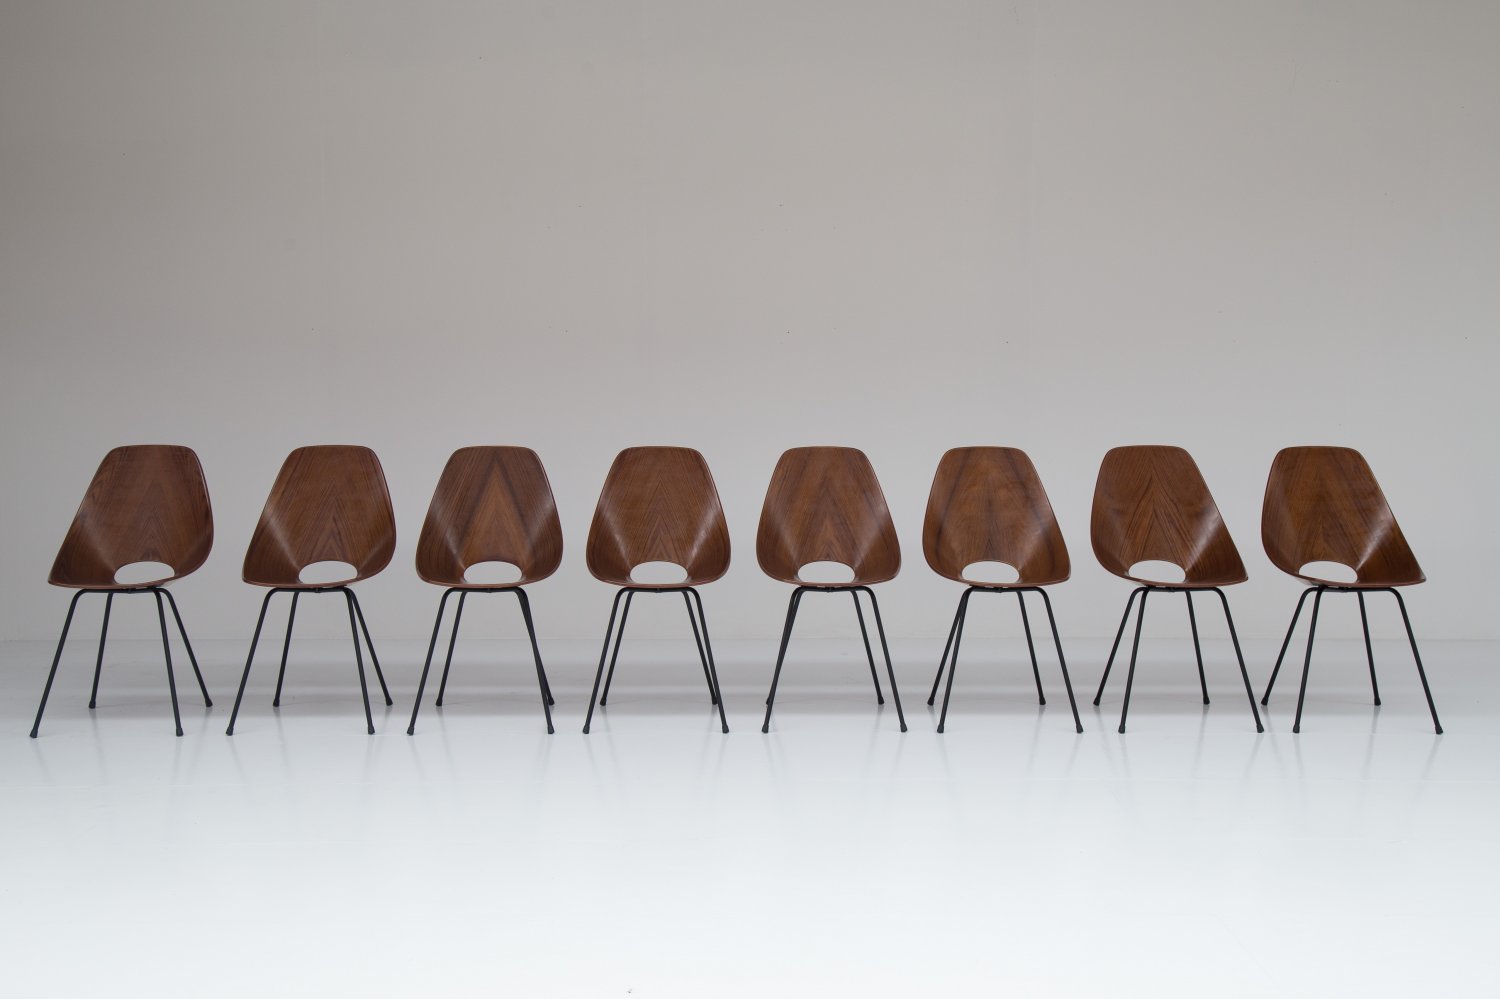 Set of 8 medea chairs by Vittorio Nobili 